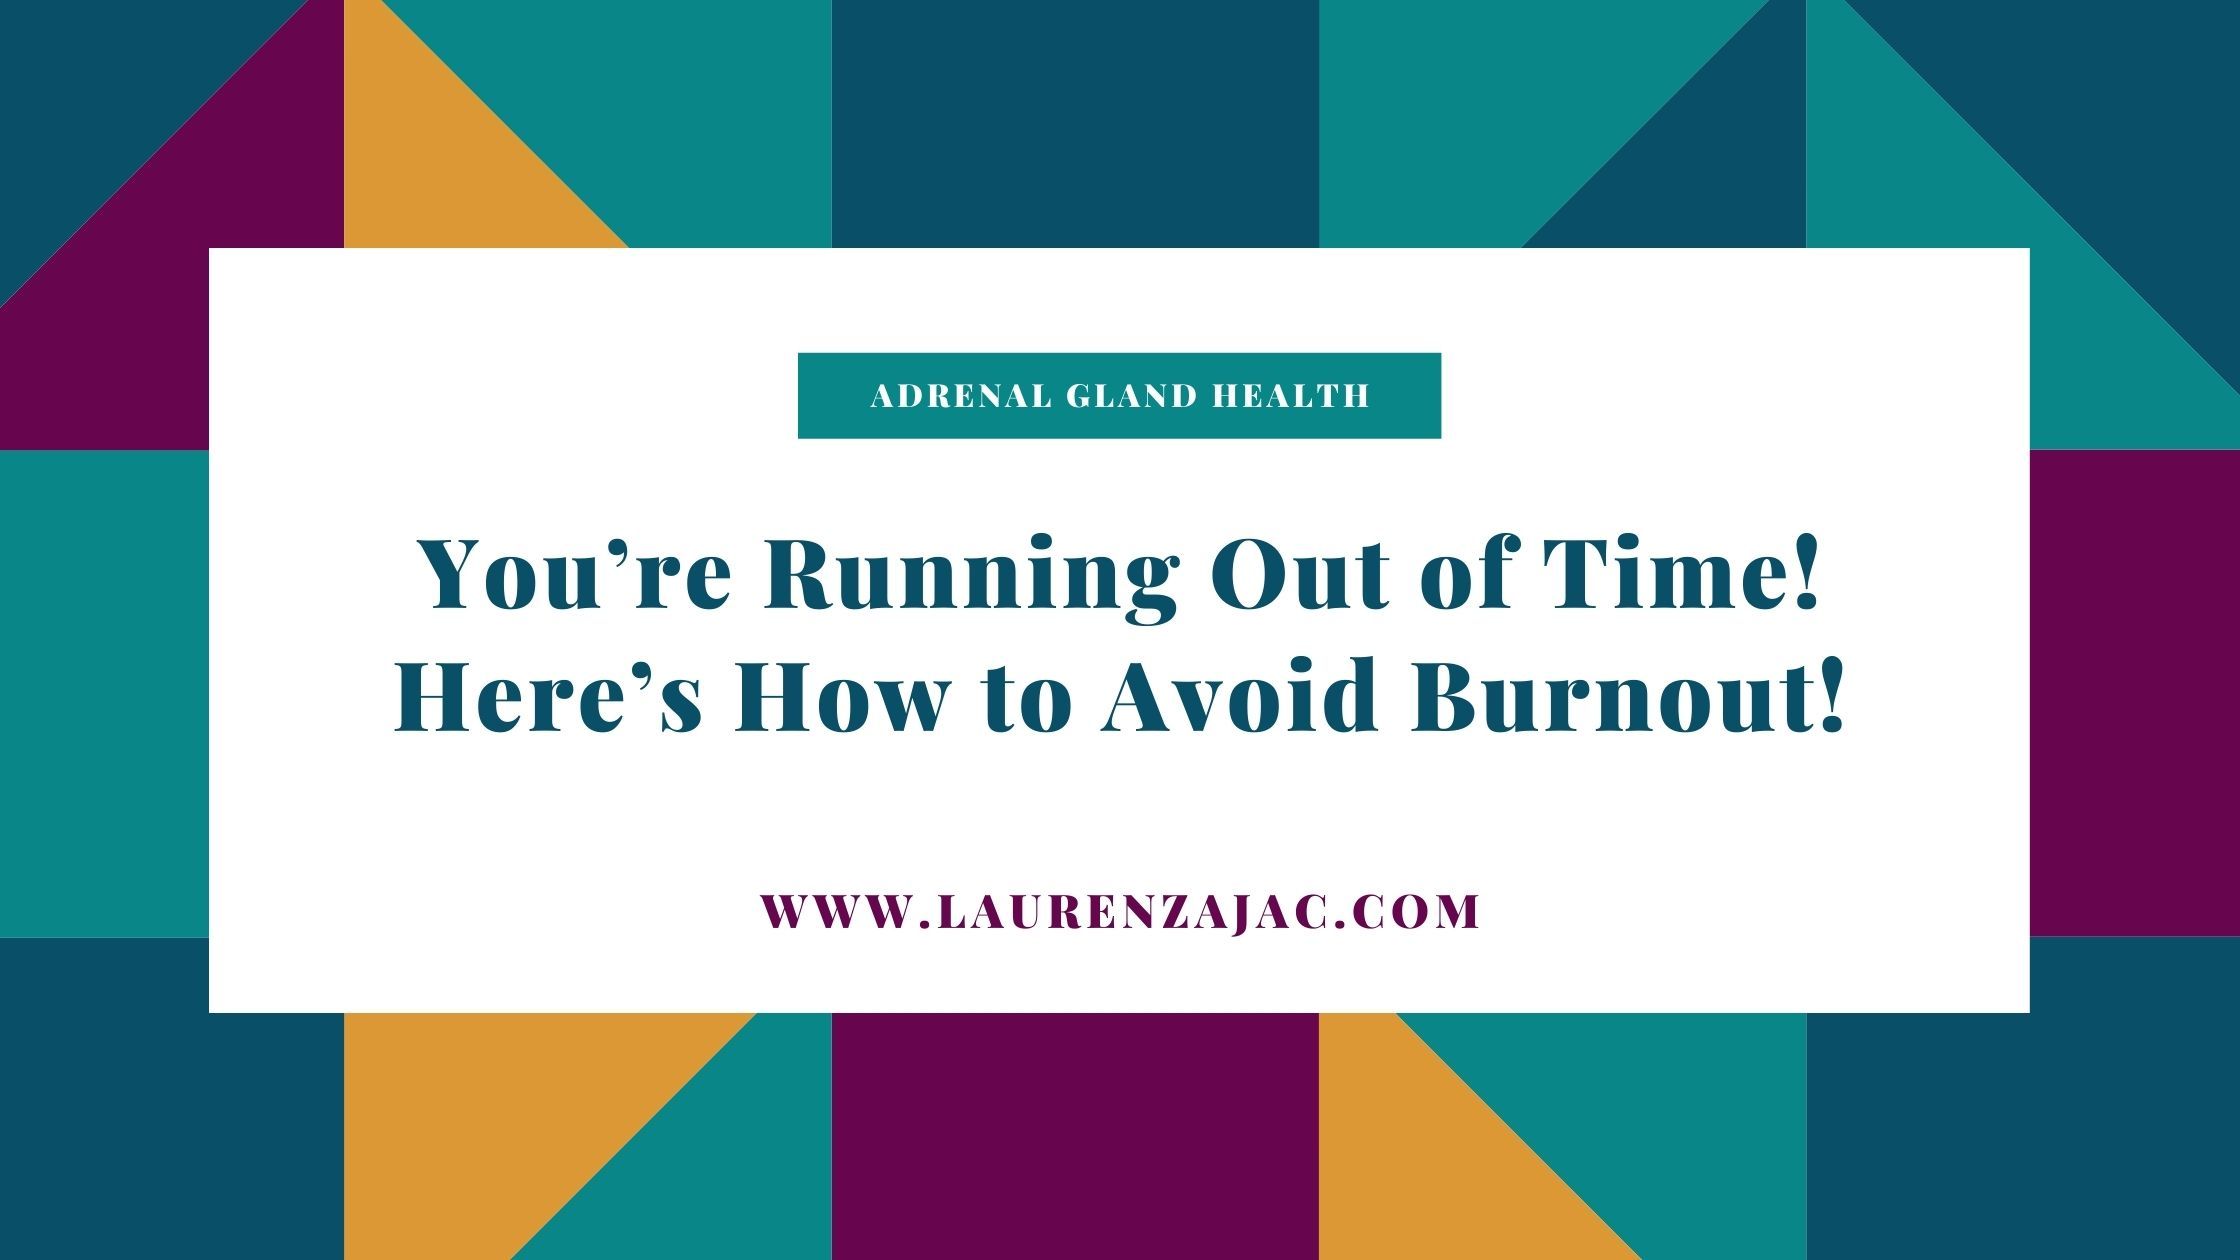 You're Running Out of Time. Get Help from Lauren Zajac